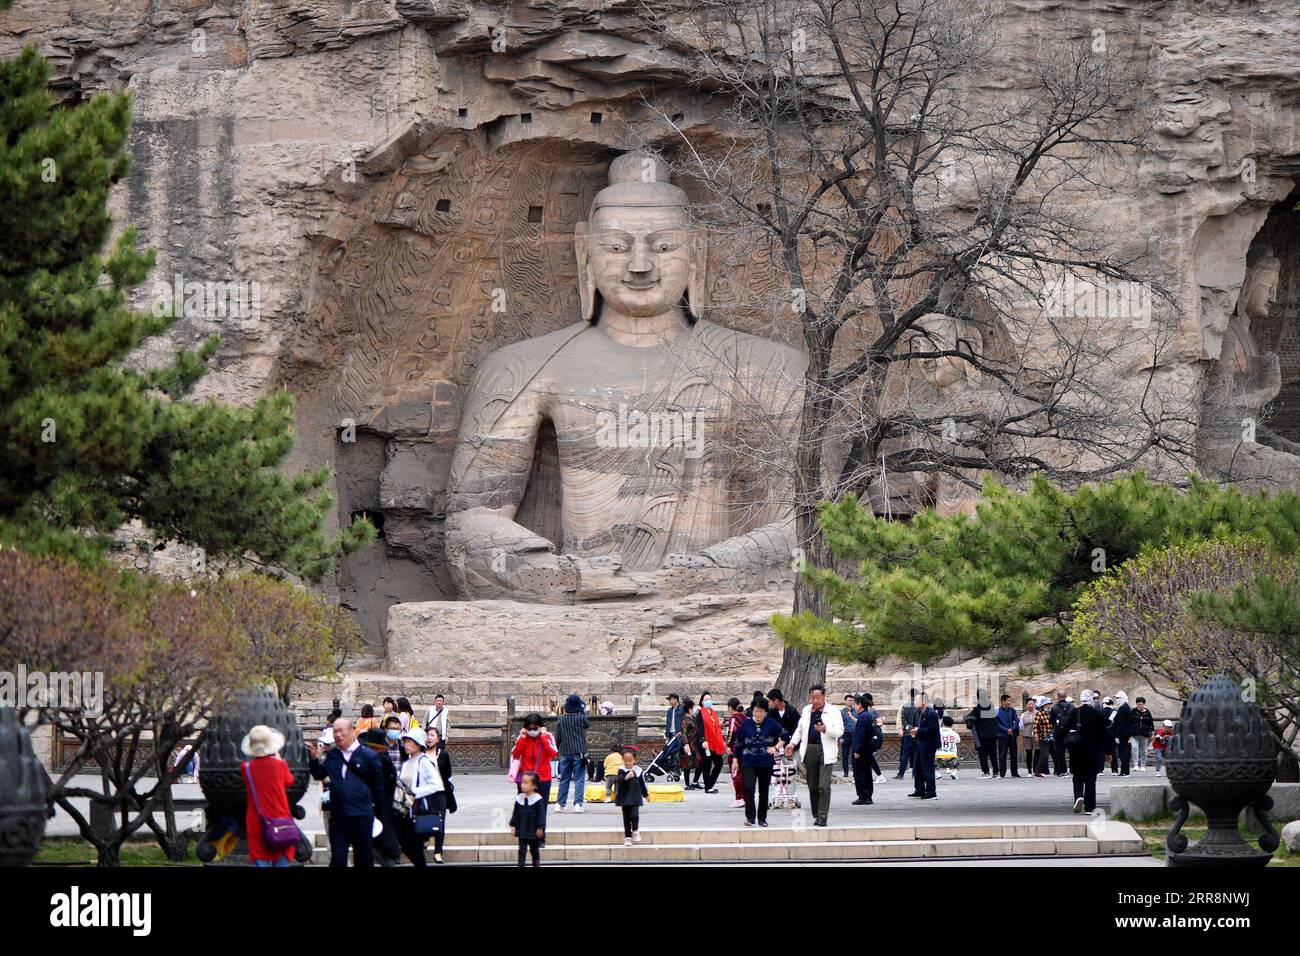 210514 -- TAIYUAN, May 14, 2021 -- Tourists visit the Yungang Grottoes in Datong, north China s Shanxi Province, on May 9, 2021. Listed as a UNESCO World Heritage site in 2001, the Yungang Grottoes is a 1,500-year-old Buddhist site that contains more than 51,000 statues of the Buddha, with the largest measuring 17 meters high and the smallest two centimeters. The Yungang Grottoes Research Institute, for its part, boasts a relics protection and restoration team mainly composed of professionals in their 20s and 30s, who are trying their very best to keep these statues in their prime condition as Stock Photo